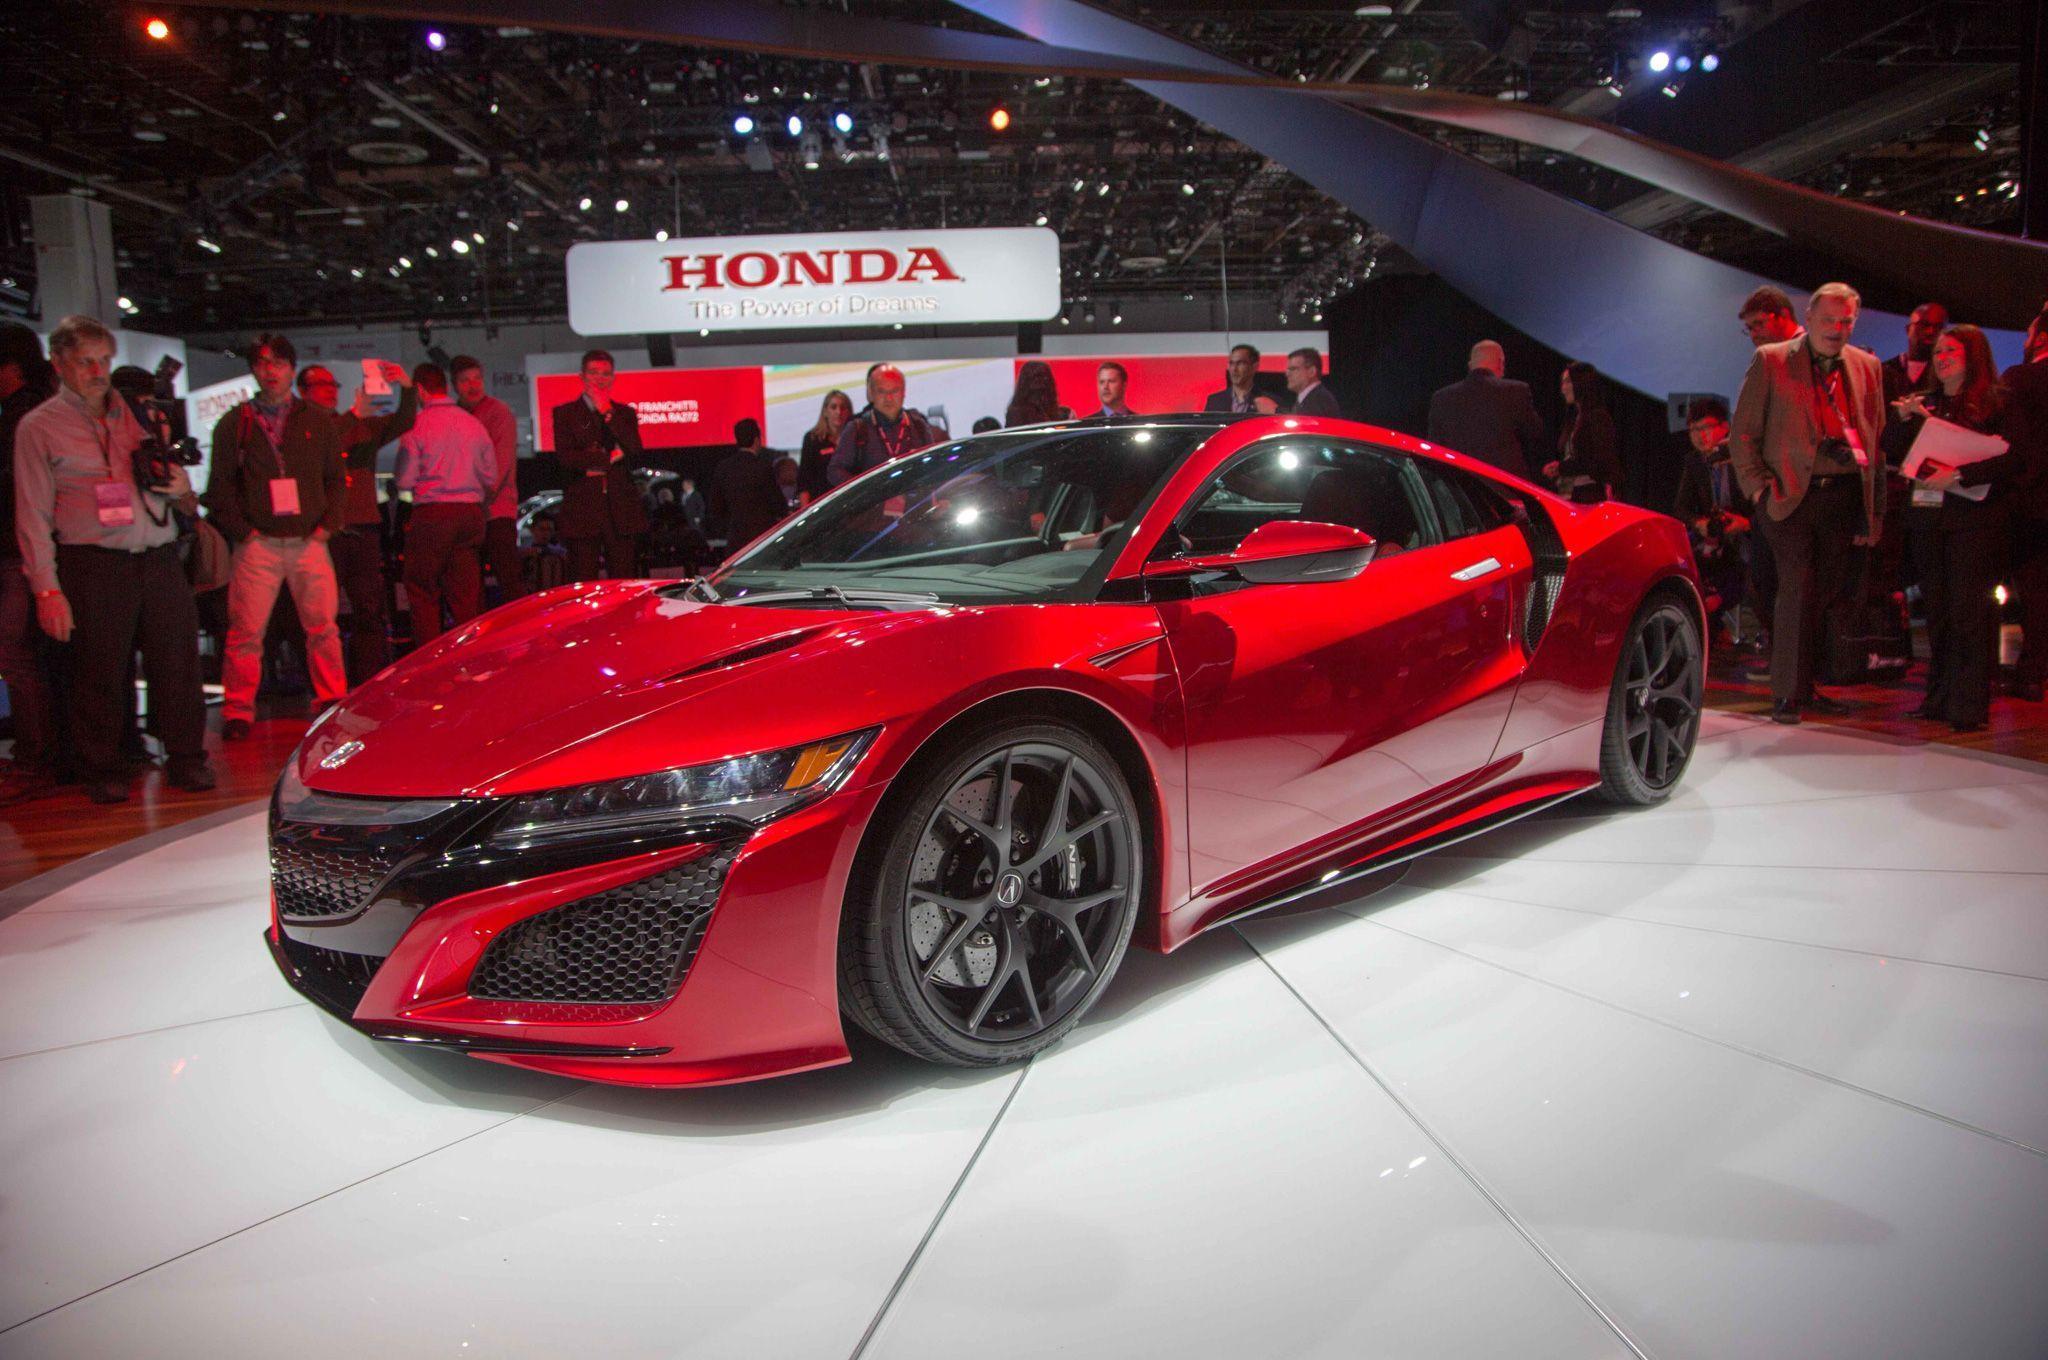 Acura NSX 2016 HD wallpaper free download